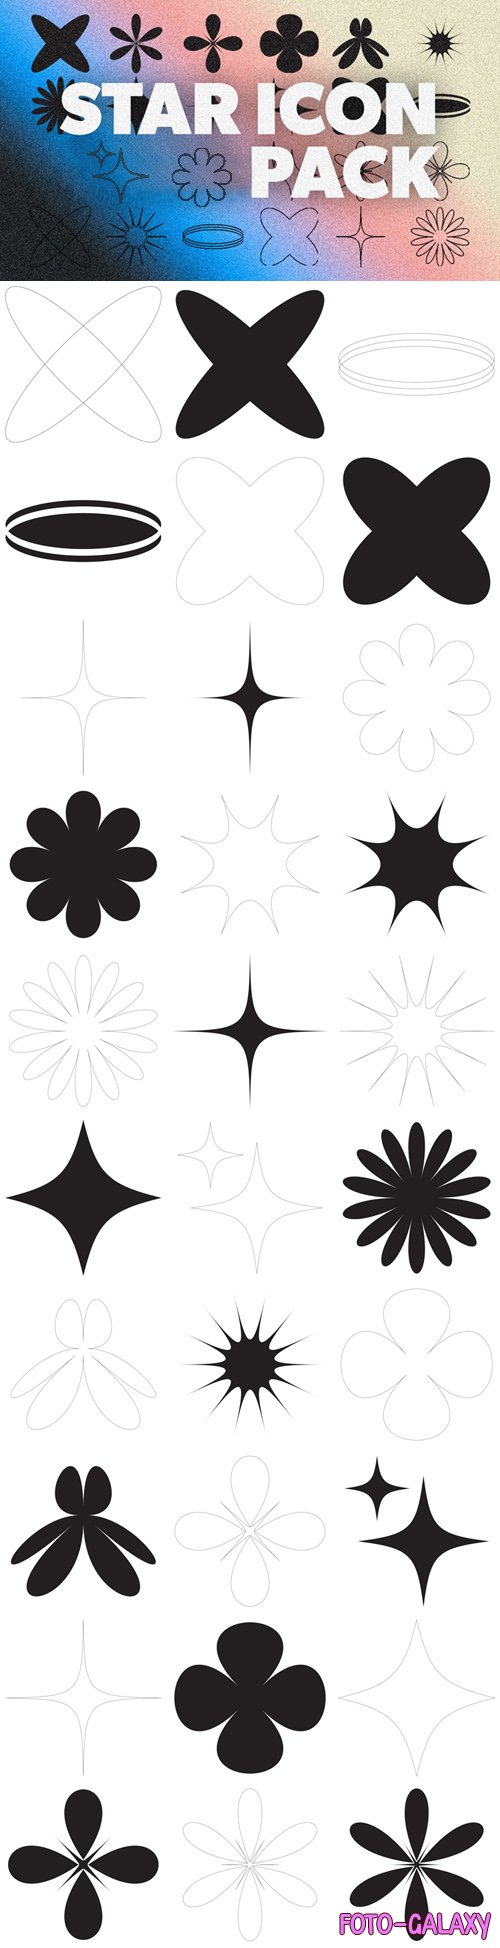 Stars & Shapes Icons Pack